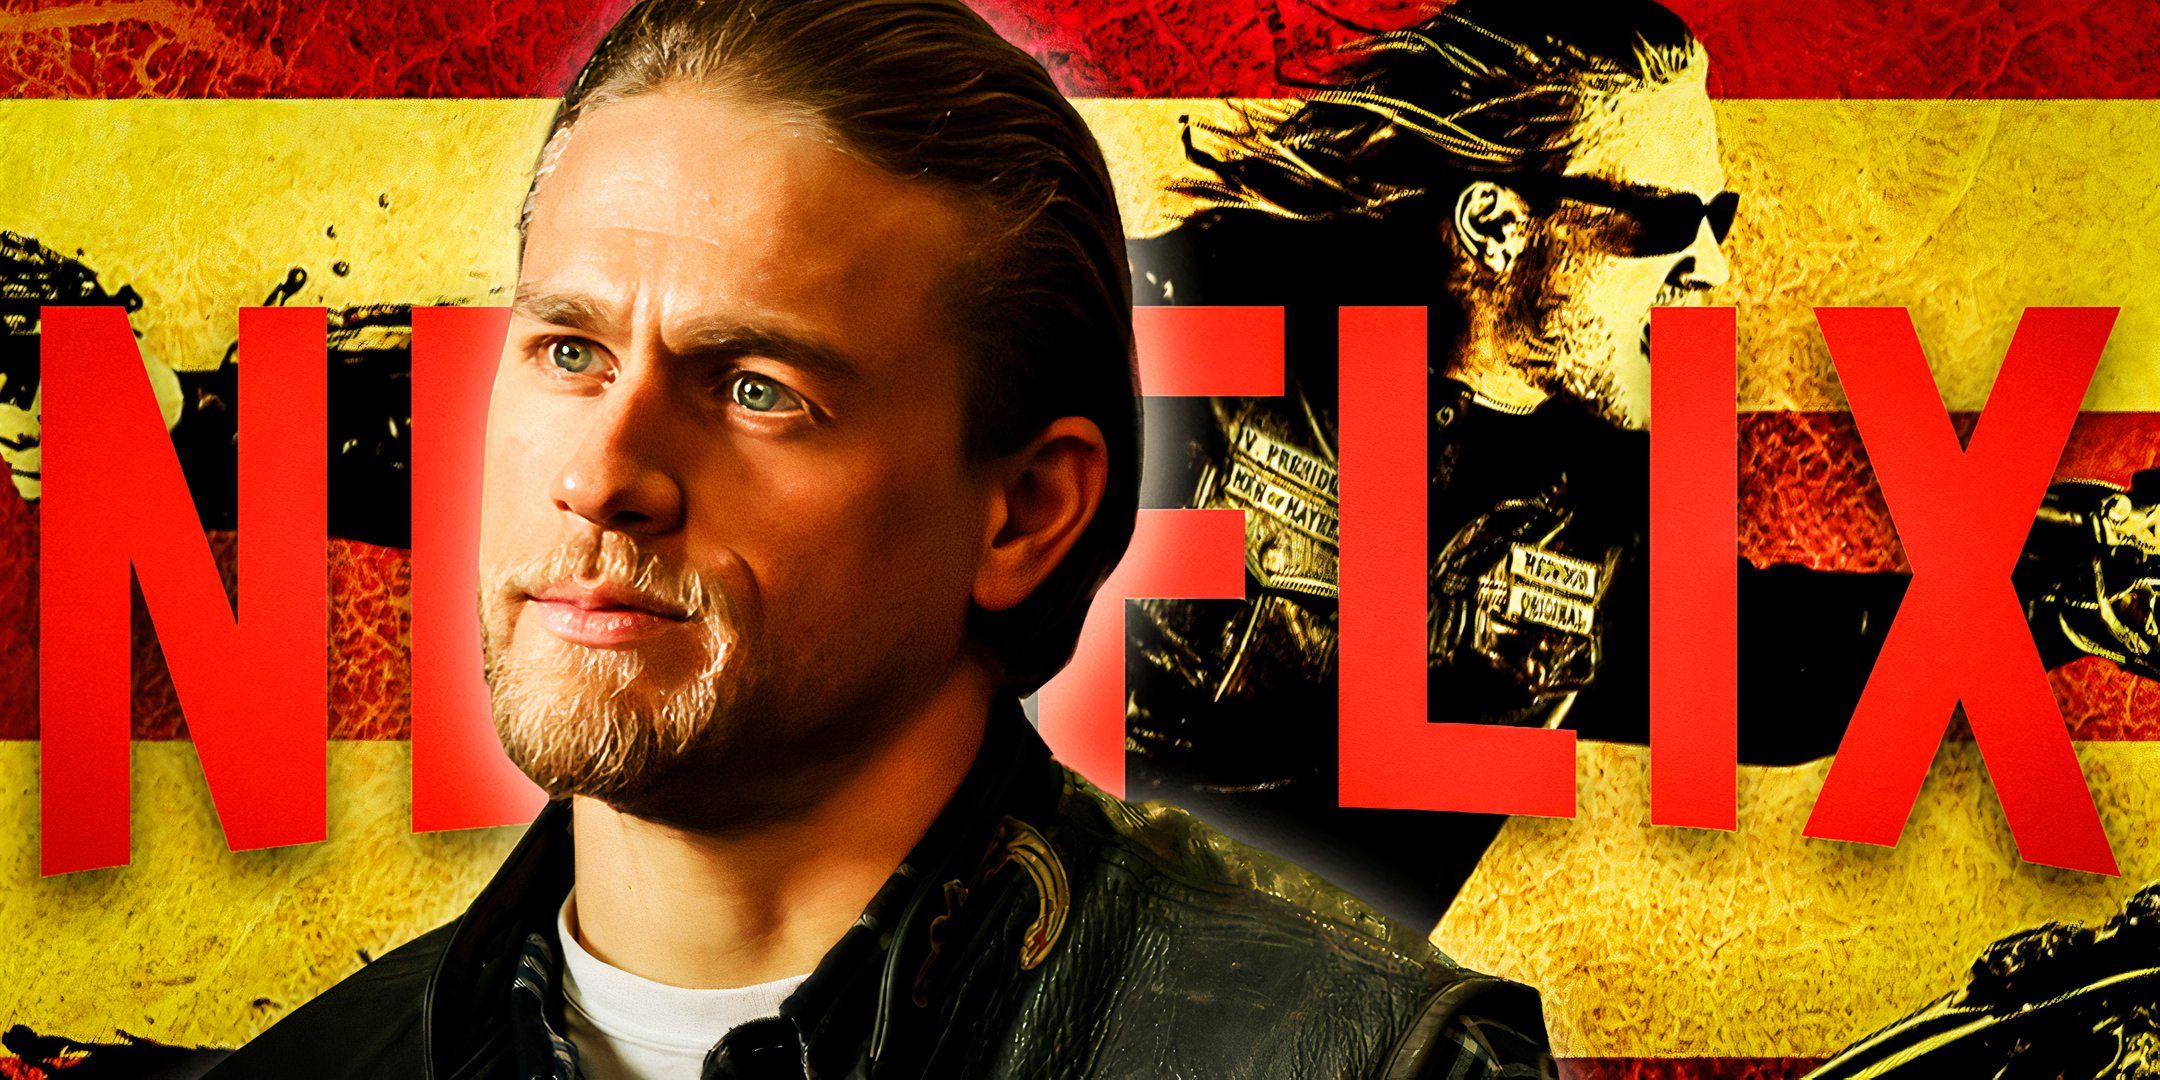 Charlie Hunnam as Jax Teller in Sons of Anarchy with the Netflix logo in the background